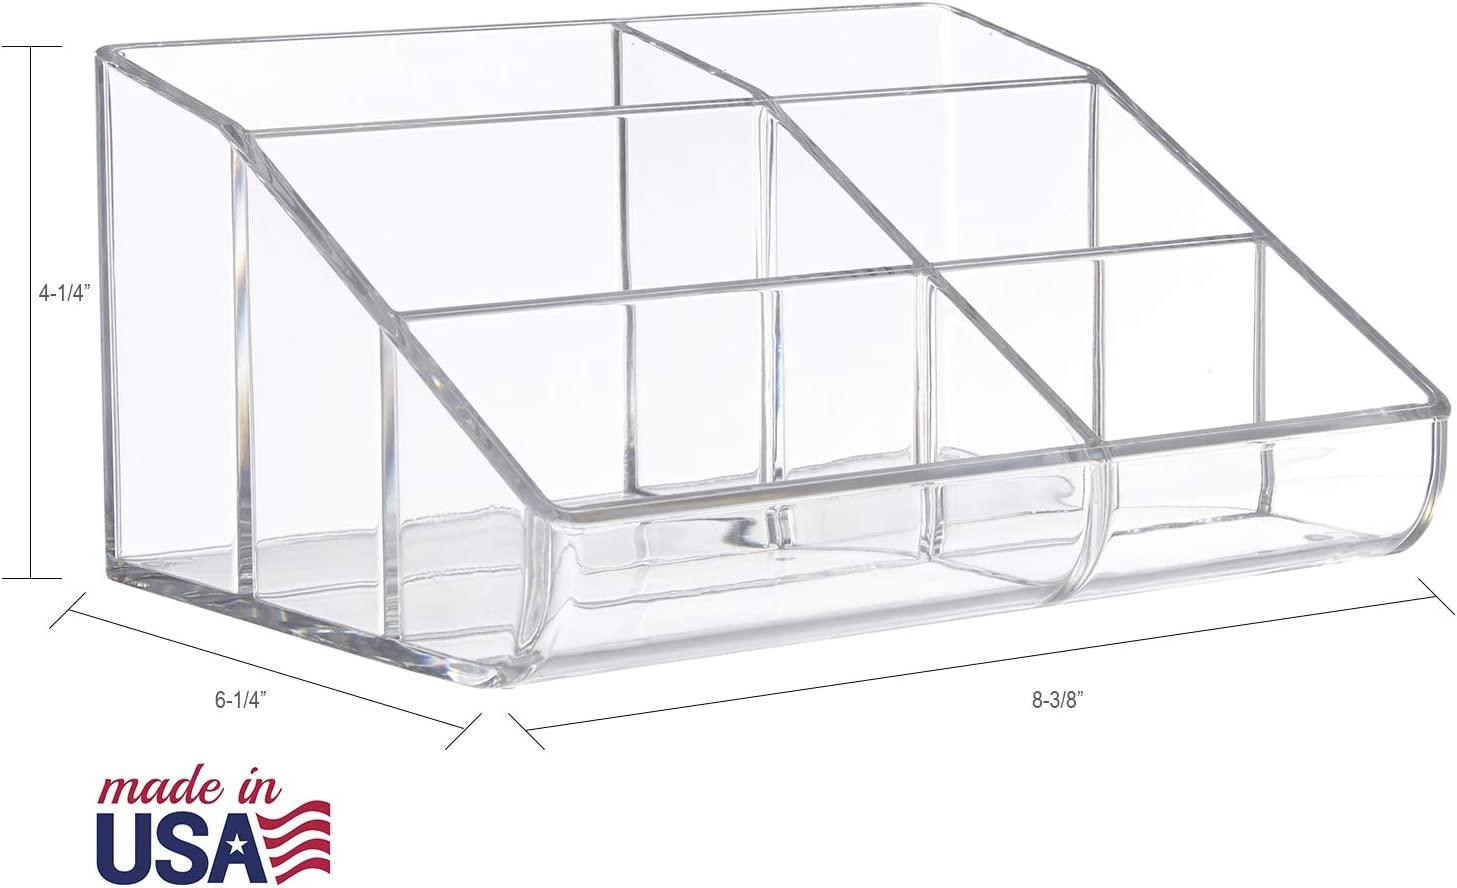 STORi Clear Plastic Multi-Level Vanity Organizer | Rectangular 4-Tier  Holder for Makeup, Eyeshadow Palettes, & up to 40 Nail Polish Bottles |  Made in